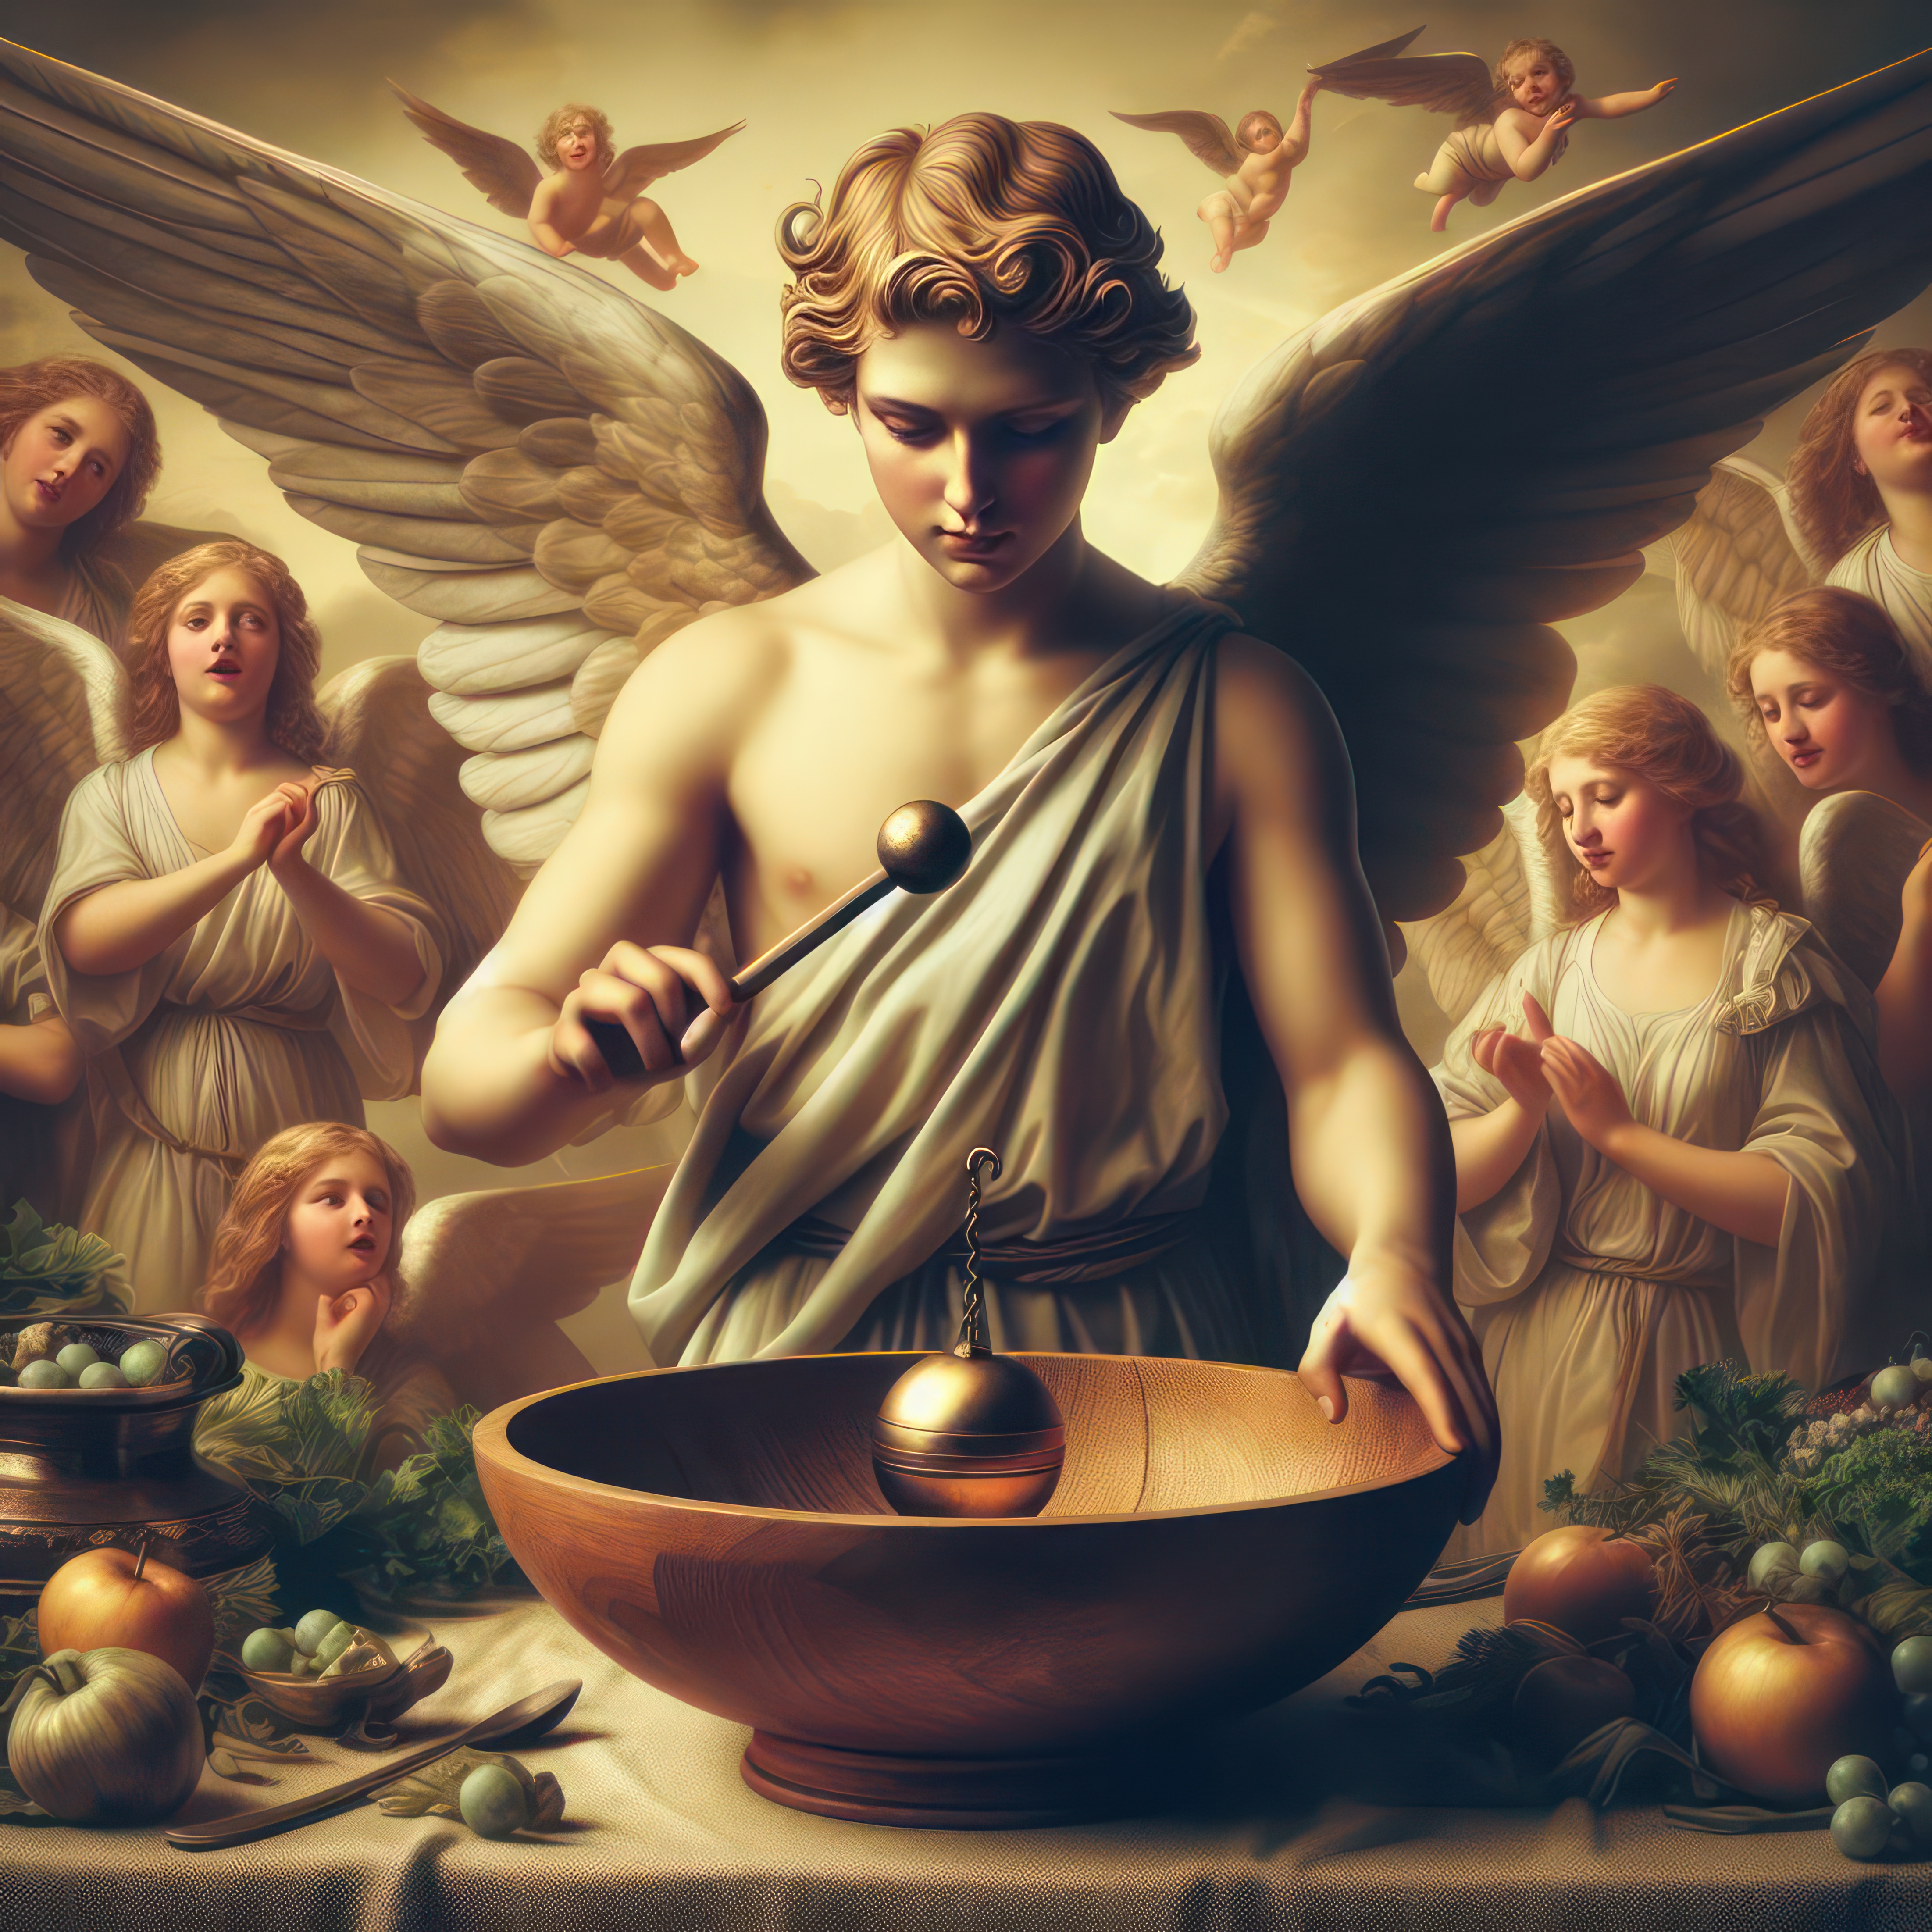 An Angel Ringing A Chiming Boading Ball In A Wooden Salad Bowl With Angels Looking On From All Around In The Style Of A Photograph